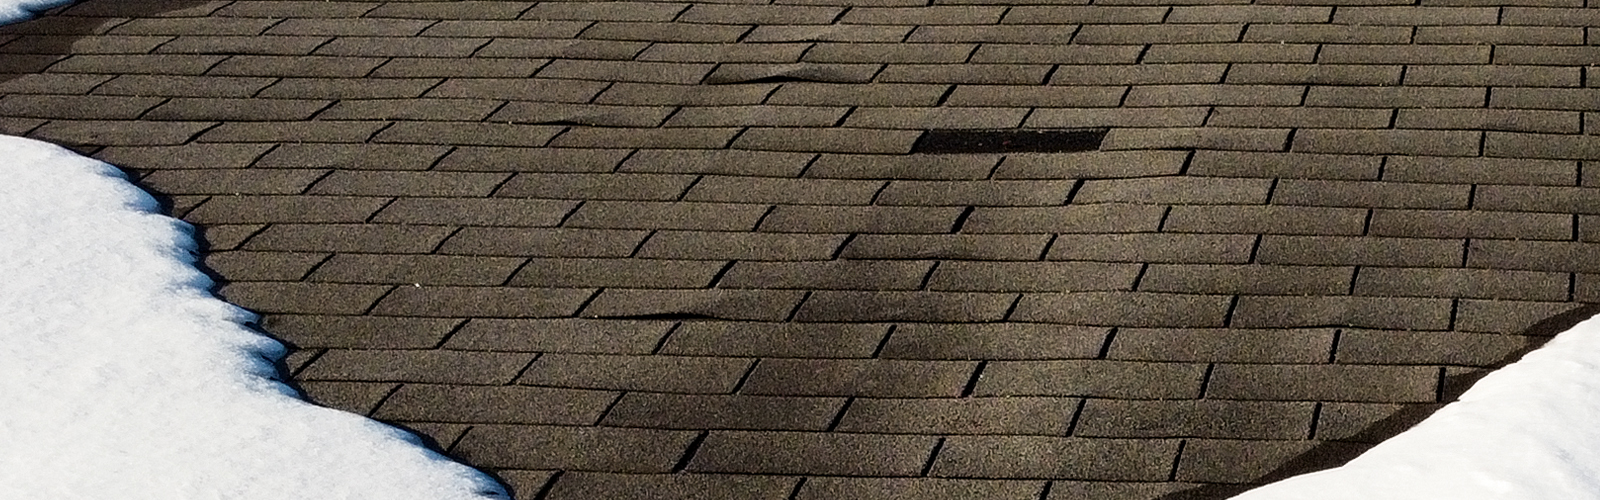 Three Worst Enemies of Your Roof (And What You Can Do About It)